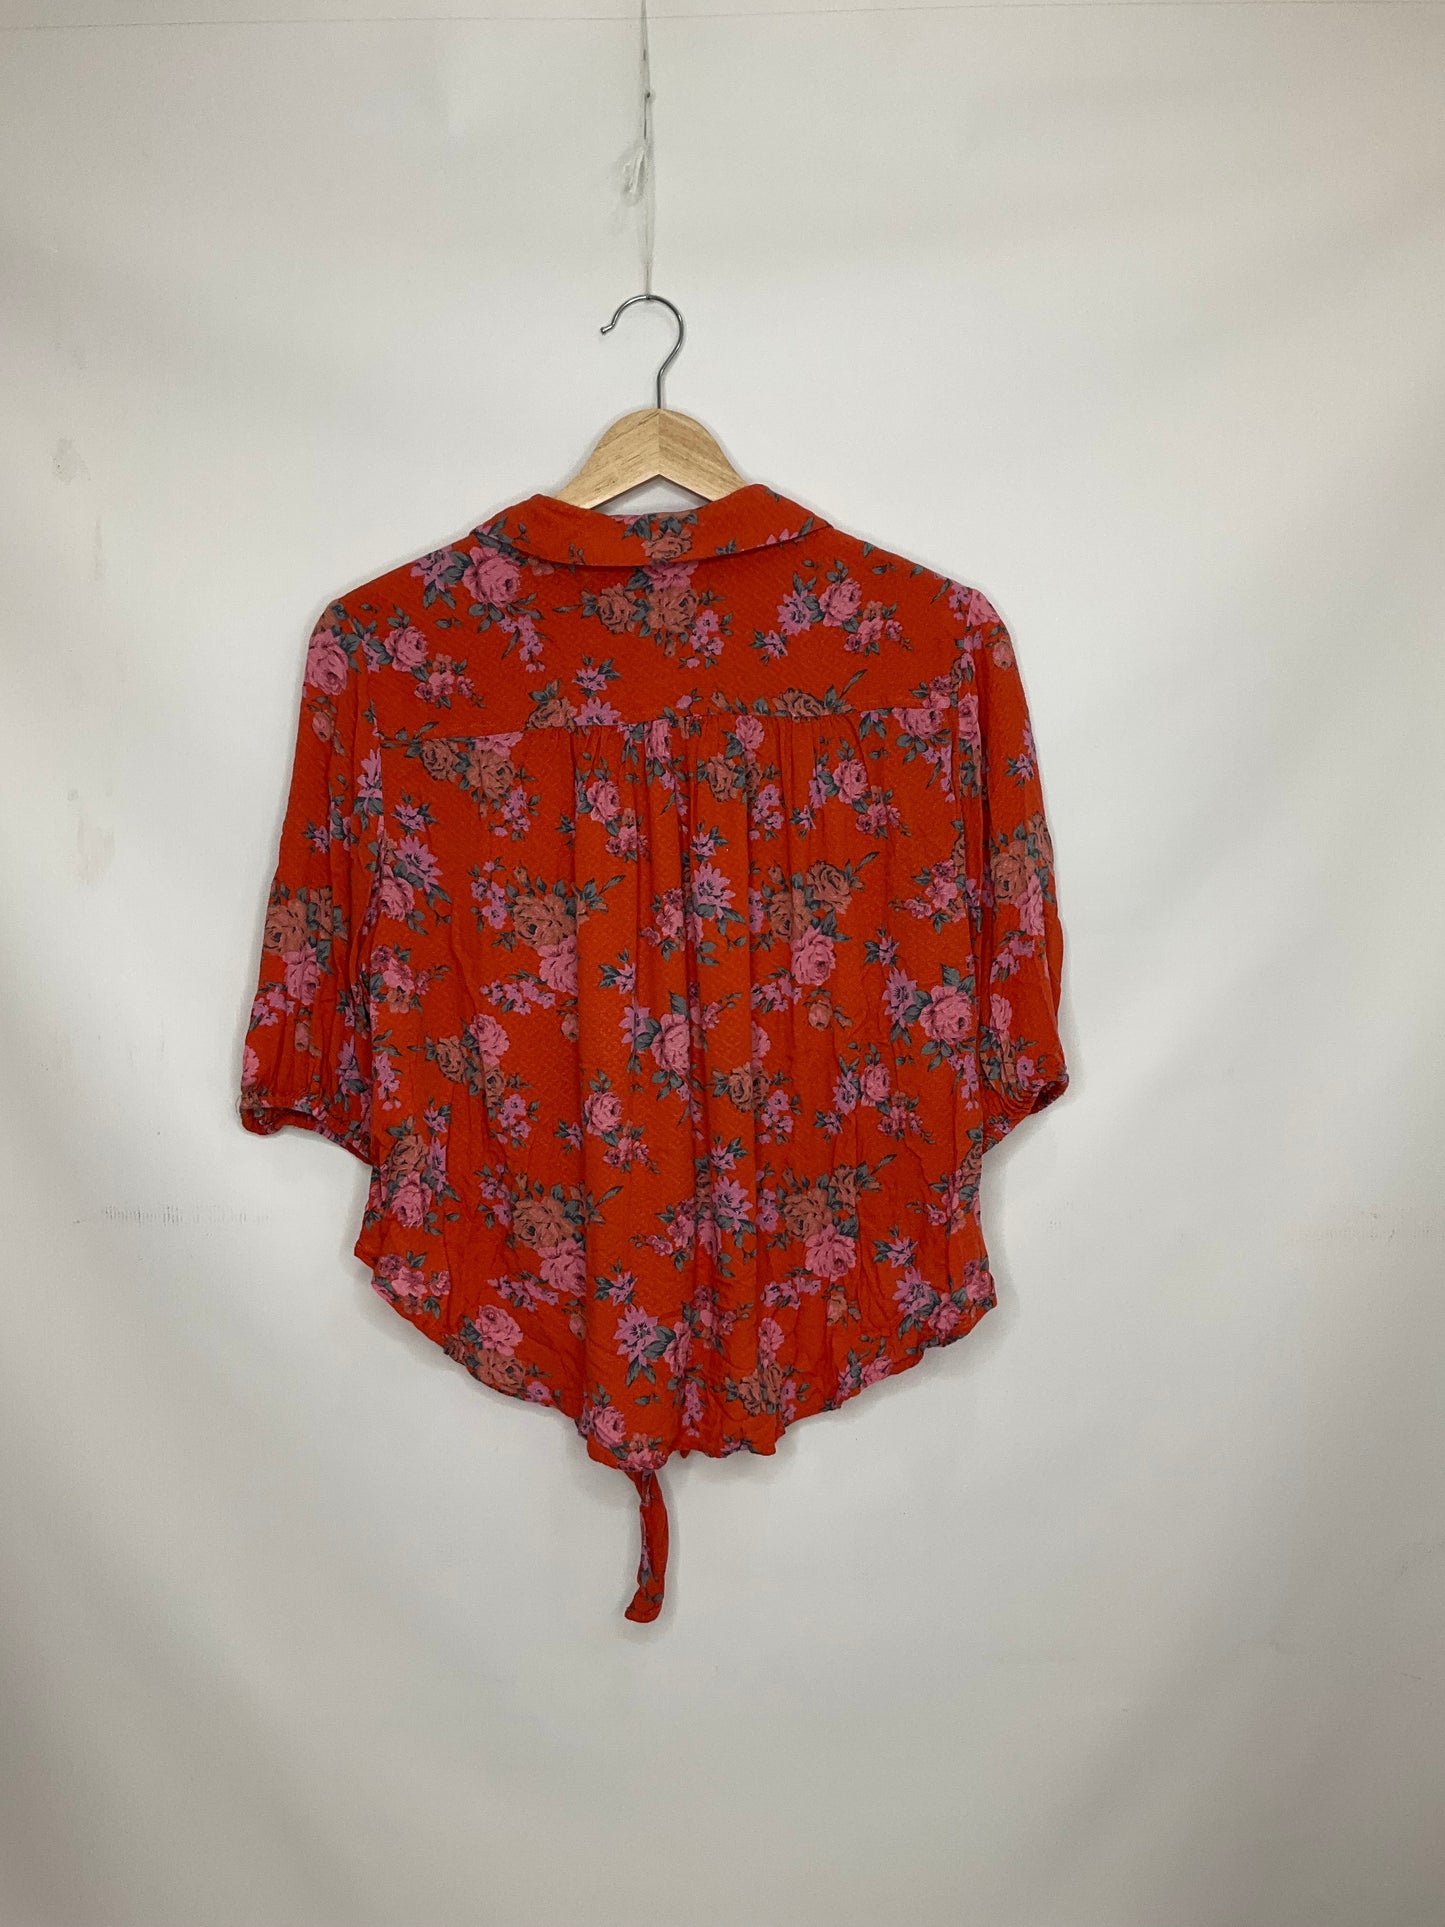 Floral Print Top Short Sleeve Free People, Size M